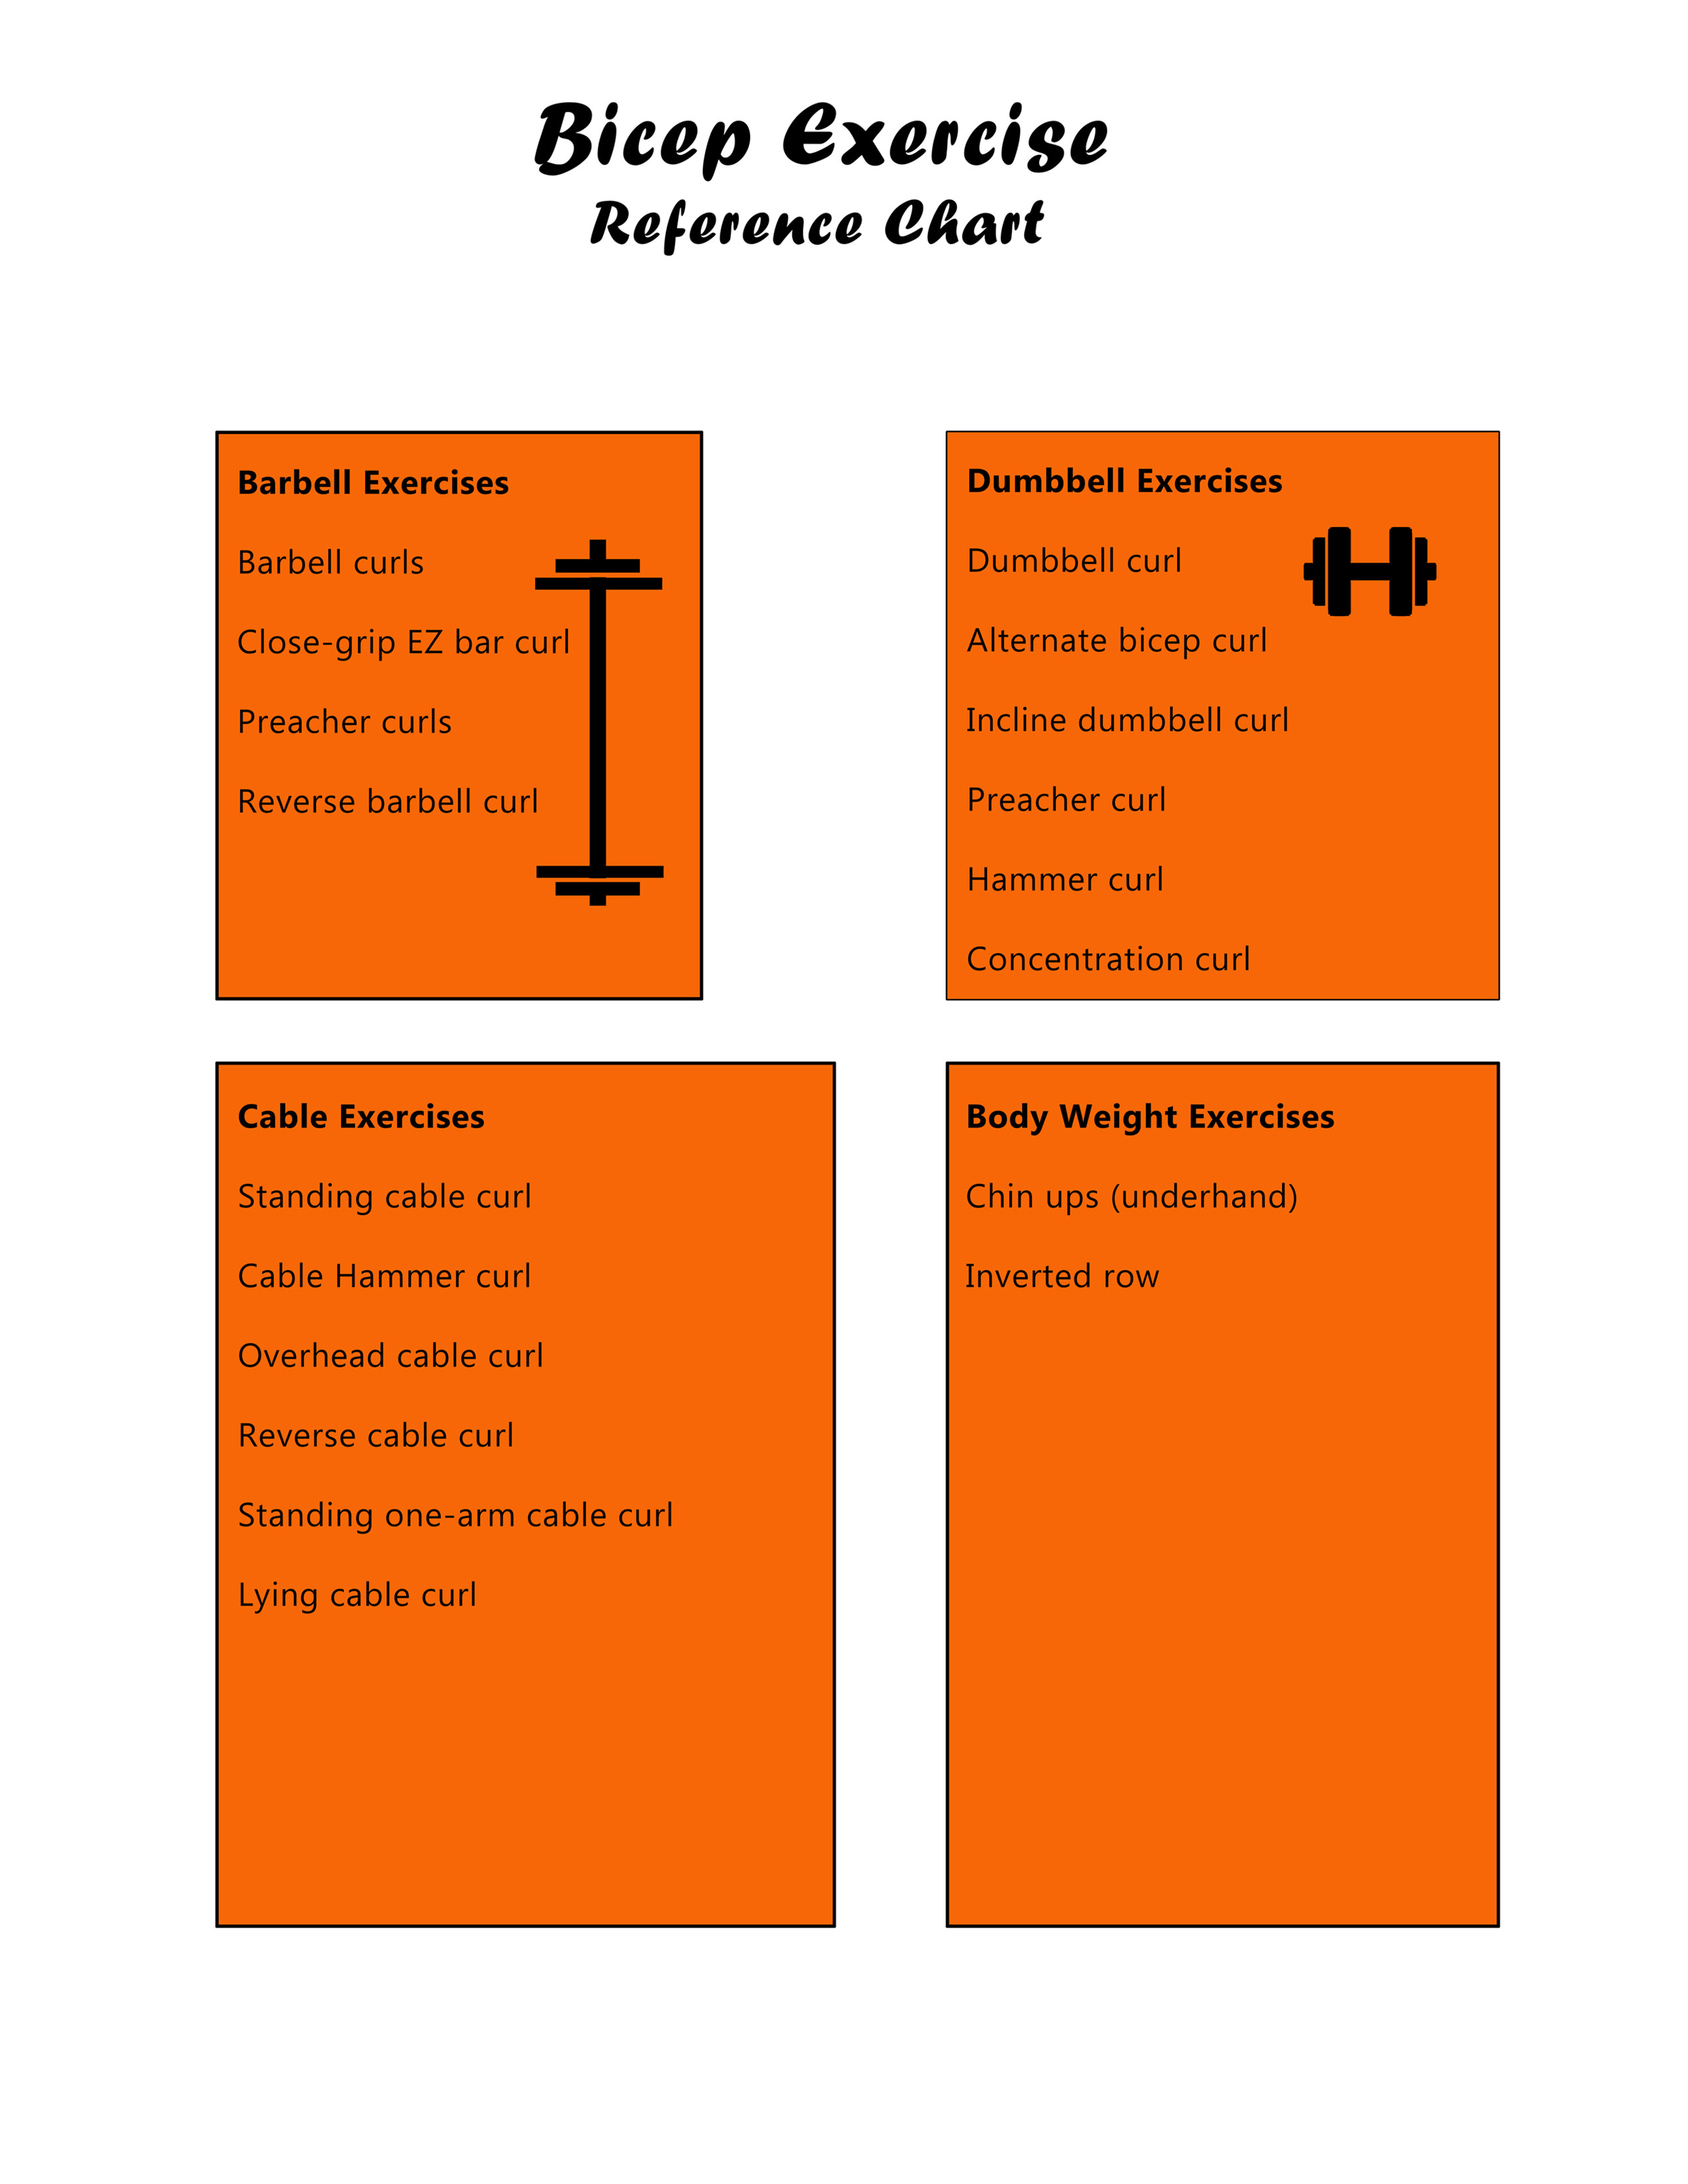 Daily Exercise Chart At Home Pdf